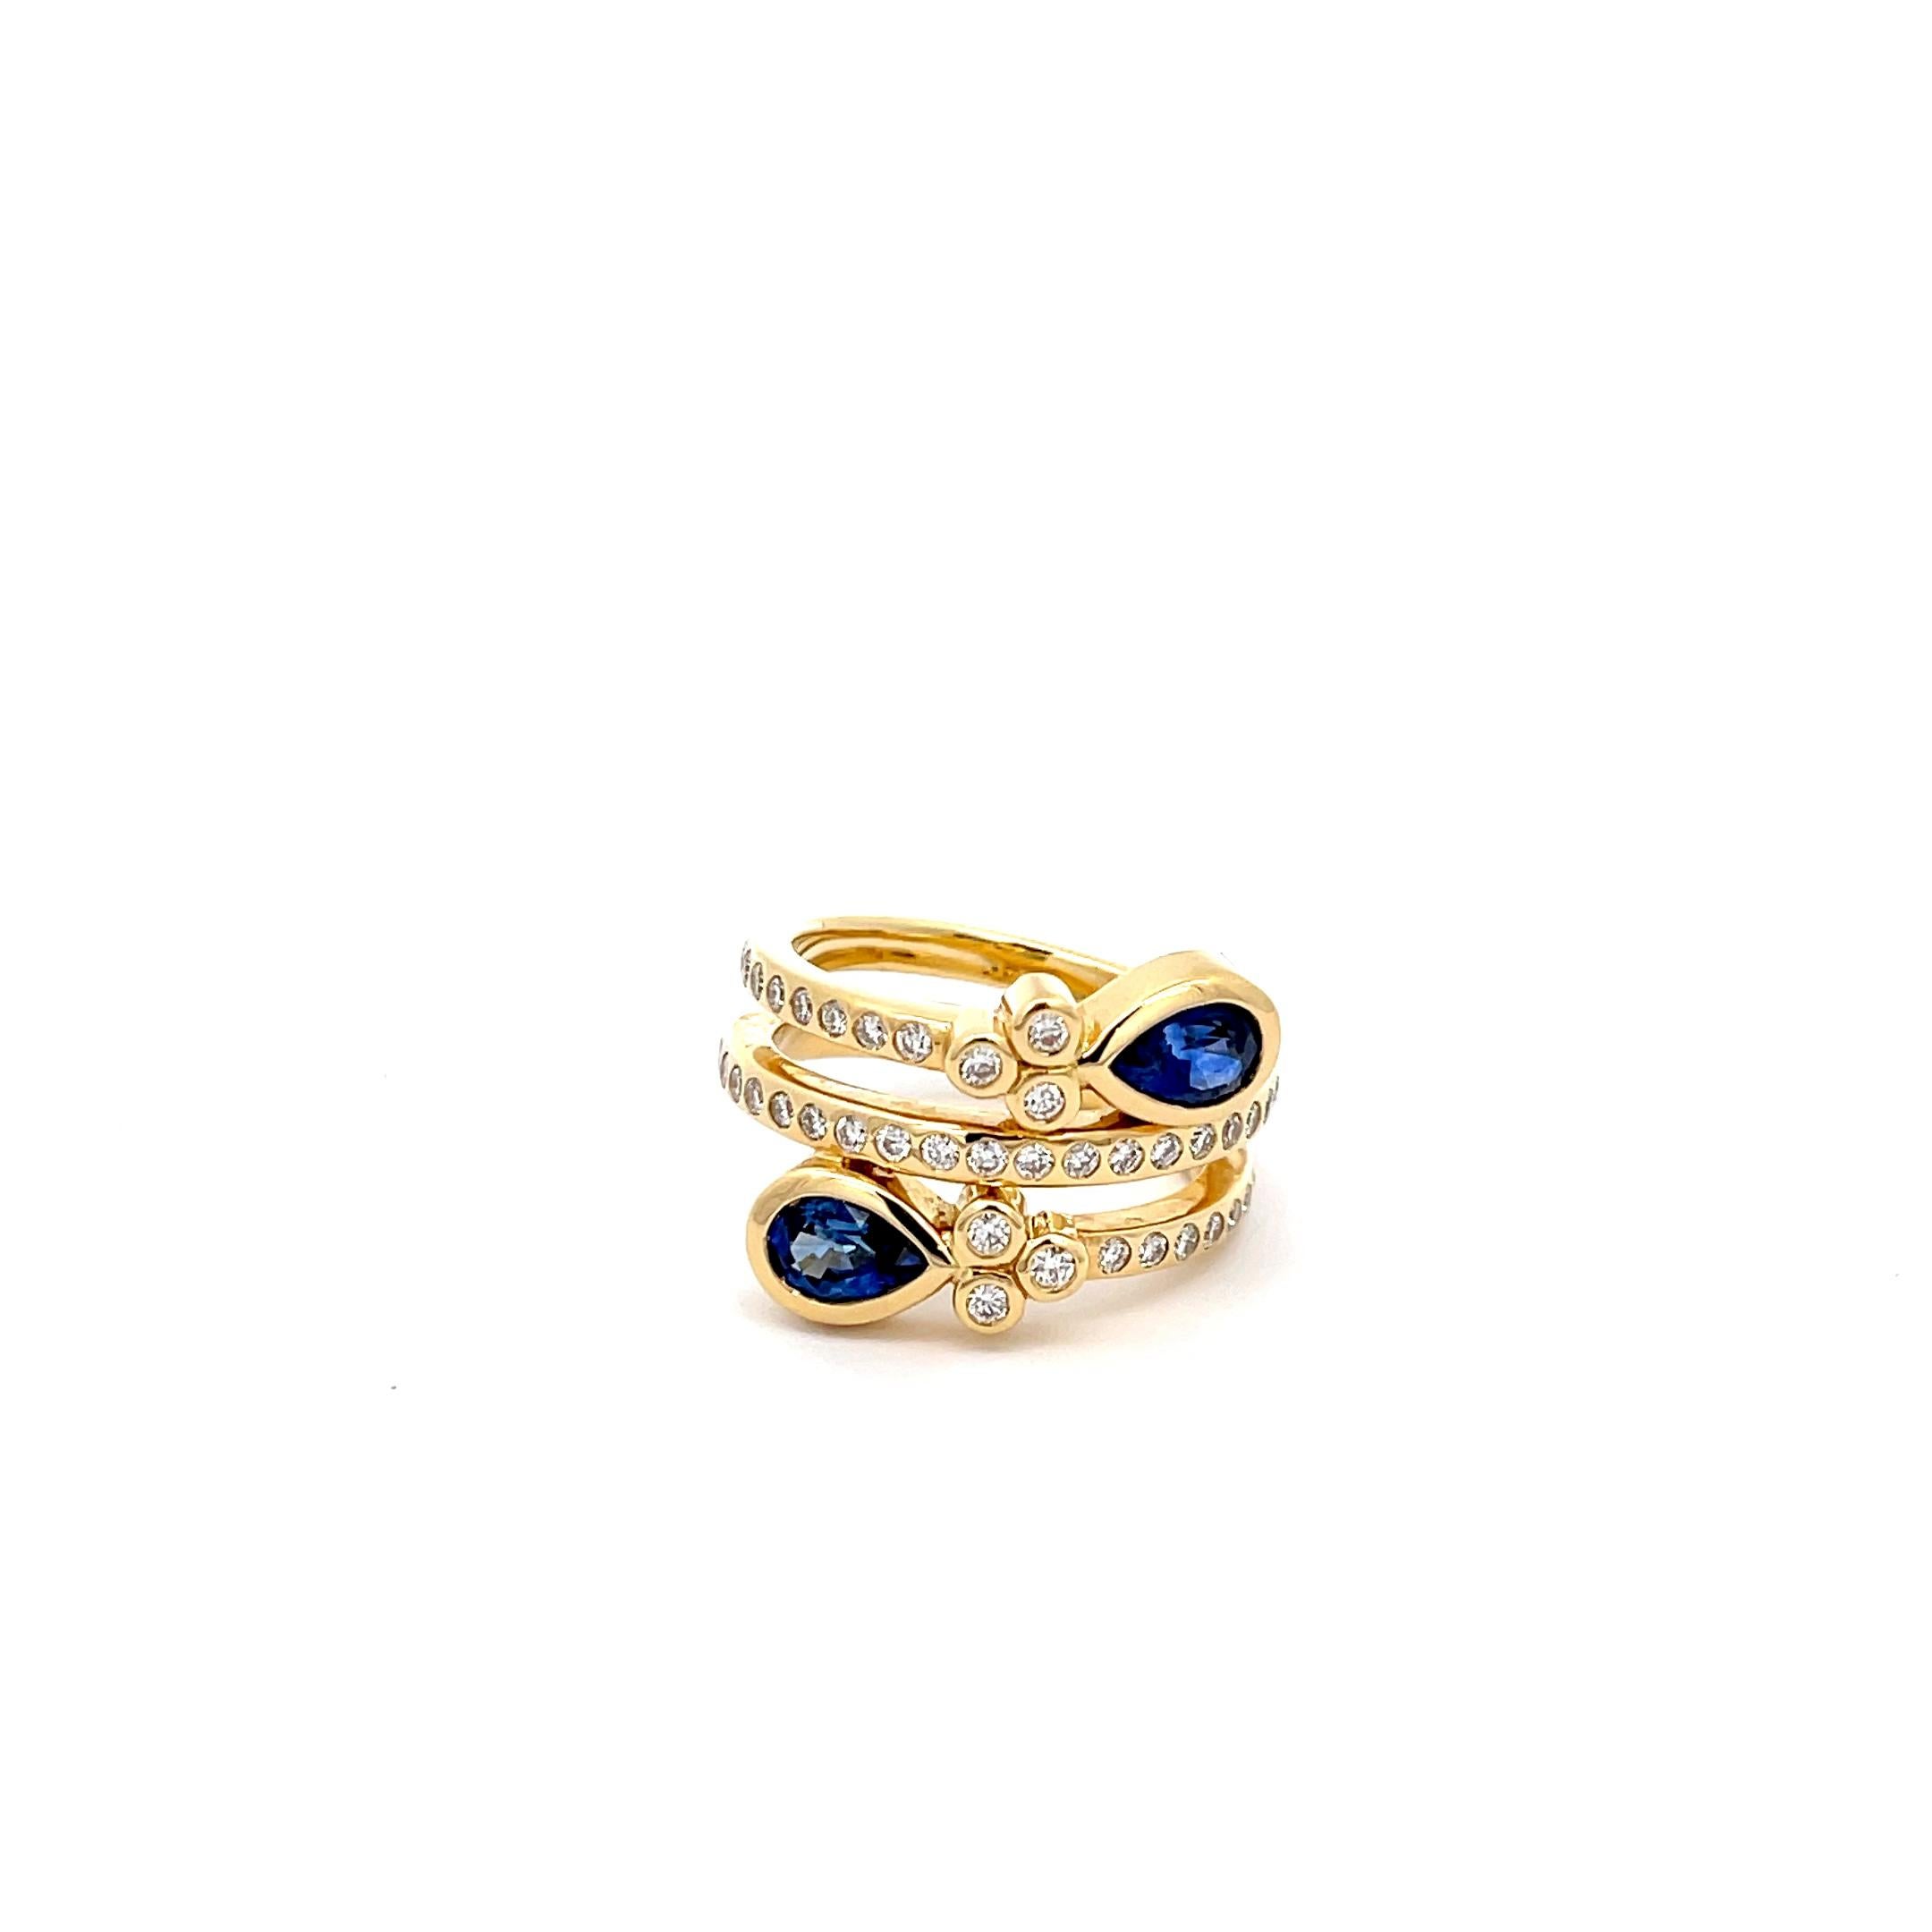 Temple St. Clair Sapphire and Diamond Wrap Ring in 18K Yellow Gold. The ring features two pear shape sapphires and brilliant round cut diamonds. Size 6.5